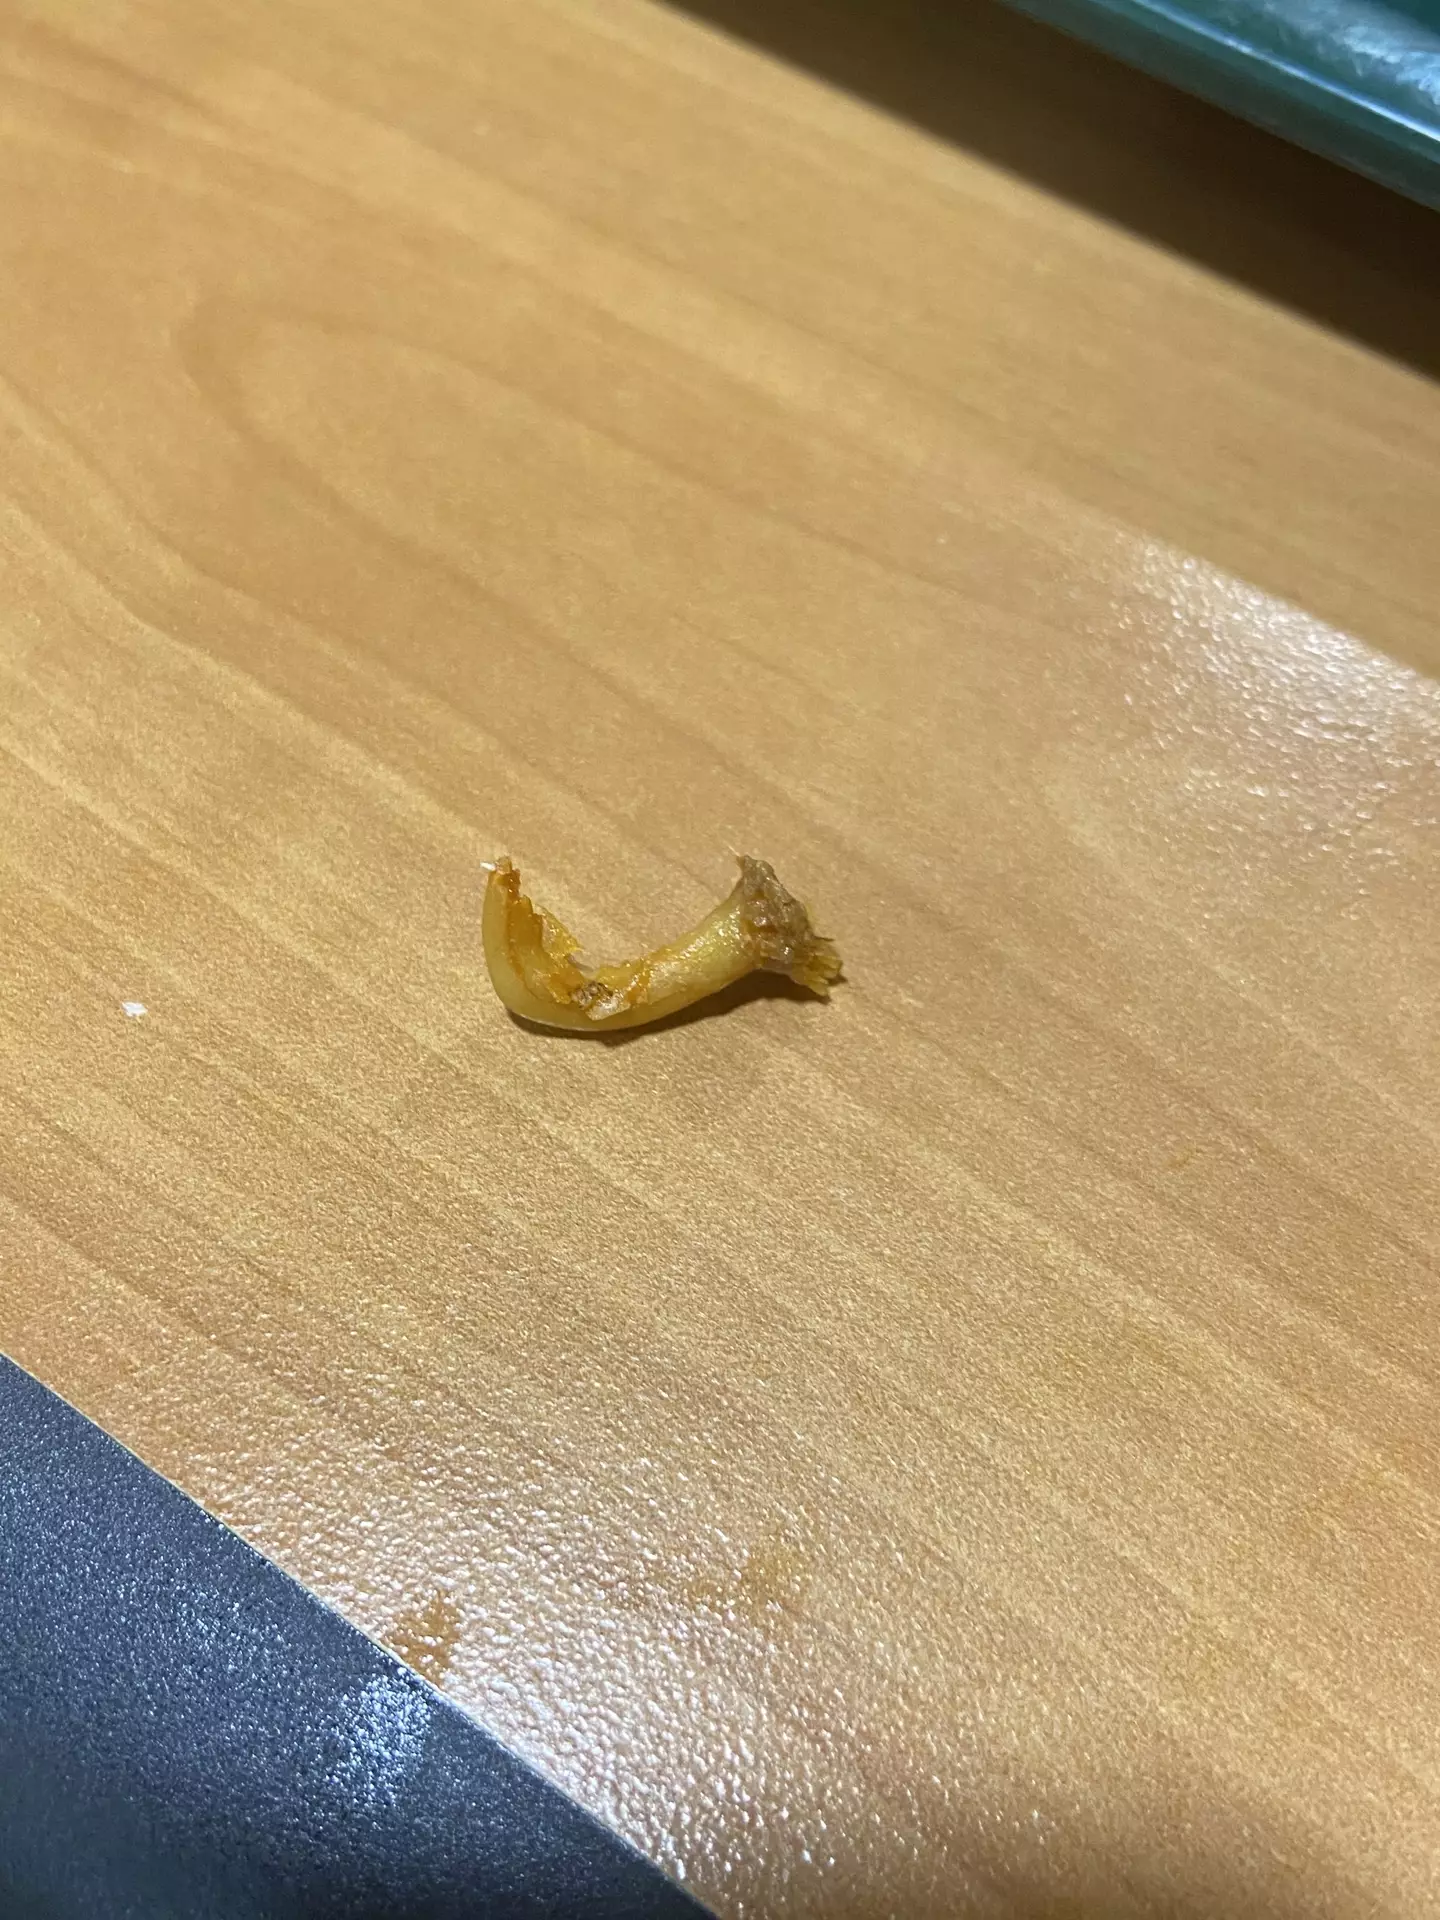 Lauren found what appears to be a chicken claw (